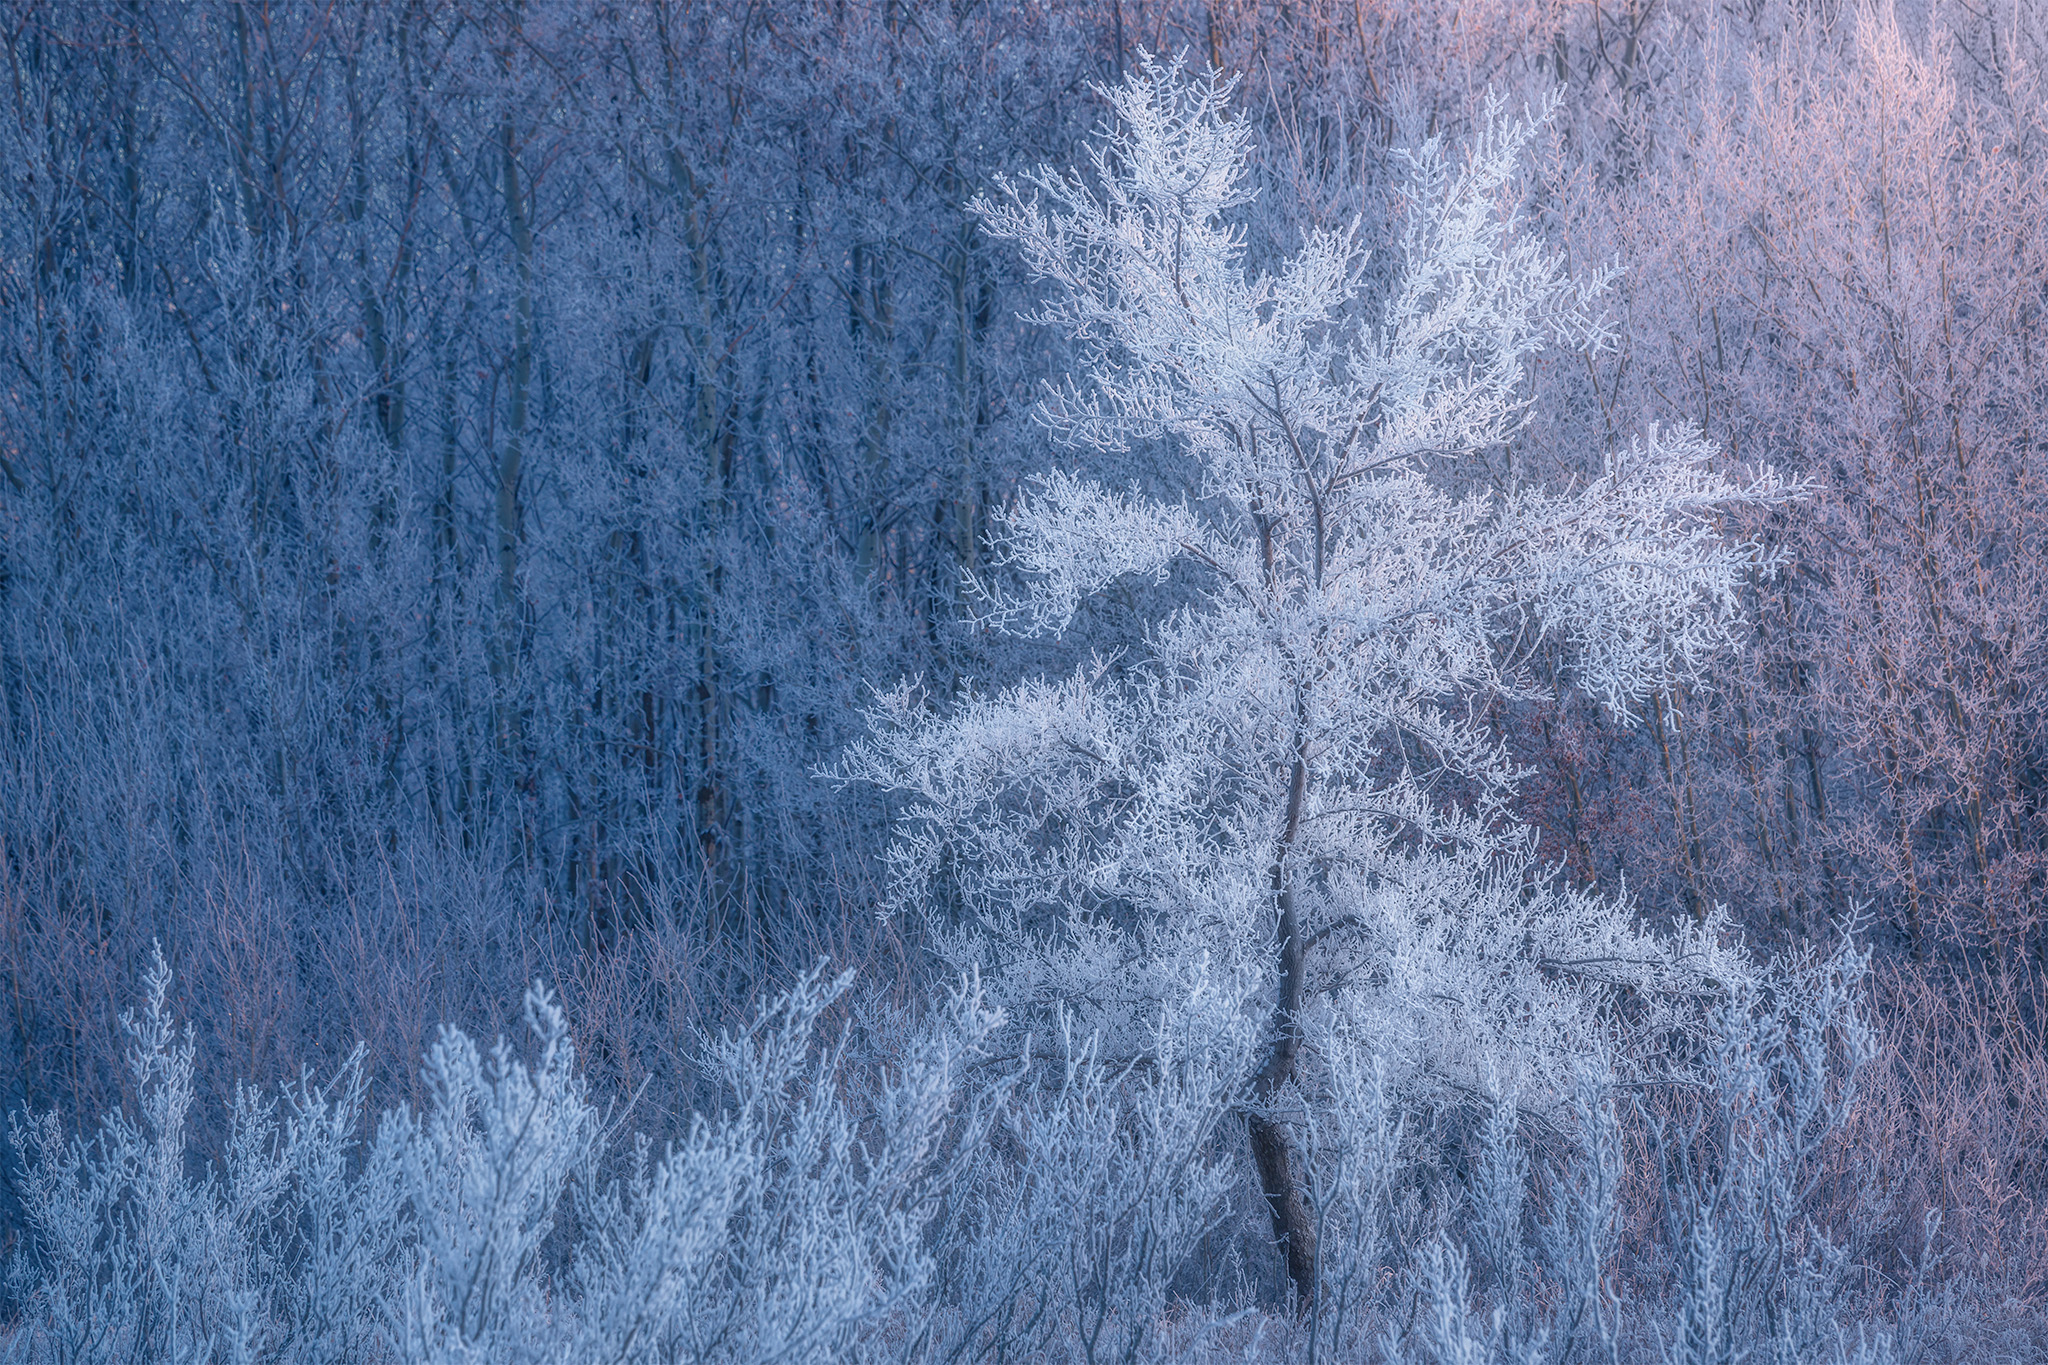 A nature photograph of a tree covered in hoar frost in Saskatchewan